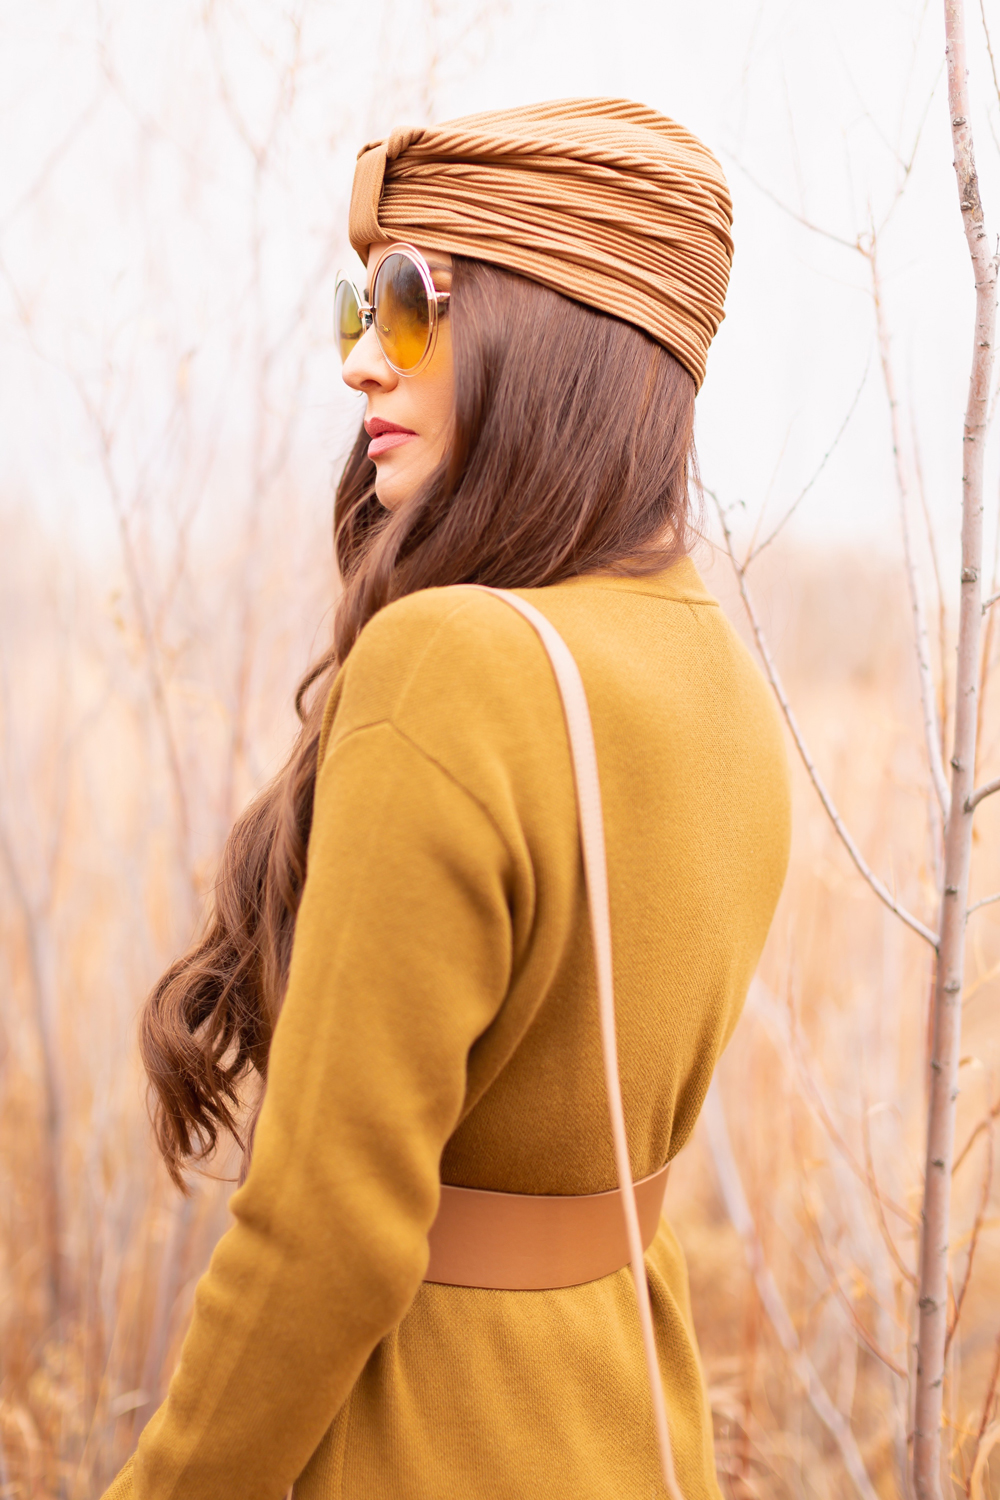 6 Luxe Bohemian Fall Outfits | Organic Olive | Brunette woman wearing a longline olive green cardigan, taupe corset belt, exotic taupe hat an oversized round olive sunglasses amongst wild fall grasses in a willow grove | Boho Fall 2022 Outfit Ideas | Feminine Bohemian Style | Polished Bohemian Style | Elegant Bohemian Style | Bohemian Outfit Ideas | How to Style a Paisley Maxi Dress for Fall | Calgary Alberta Fashion Blogger // JustineCelina.com